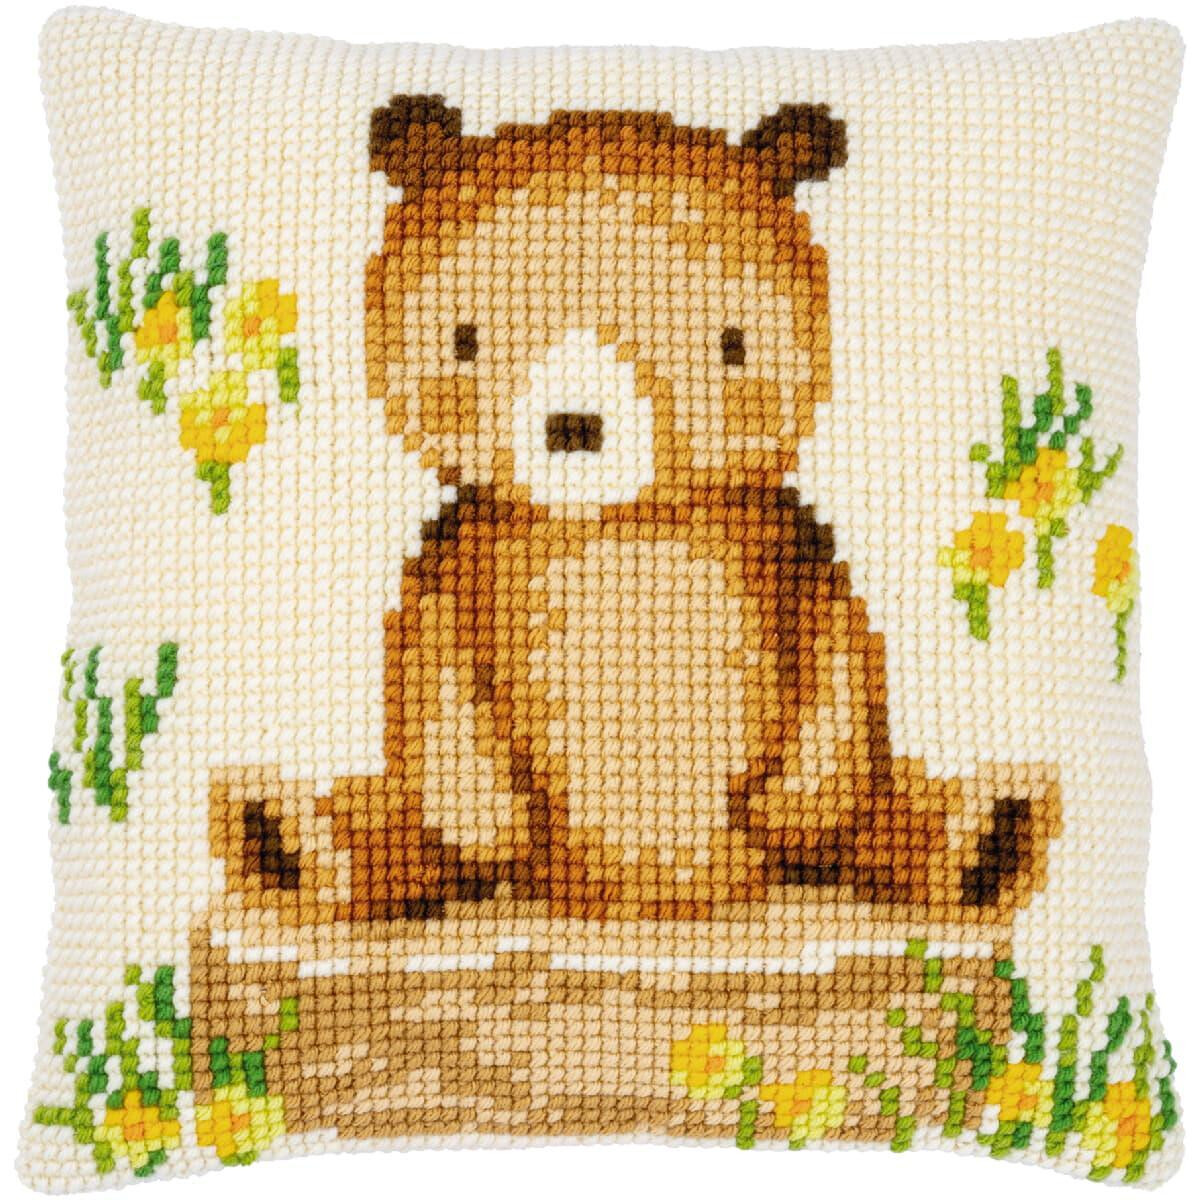 Vervaco stamped cross stitch kit cushion "Waldtiere...